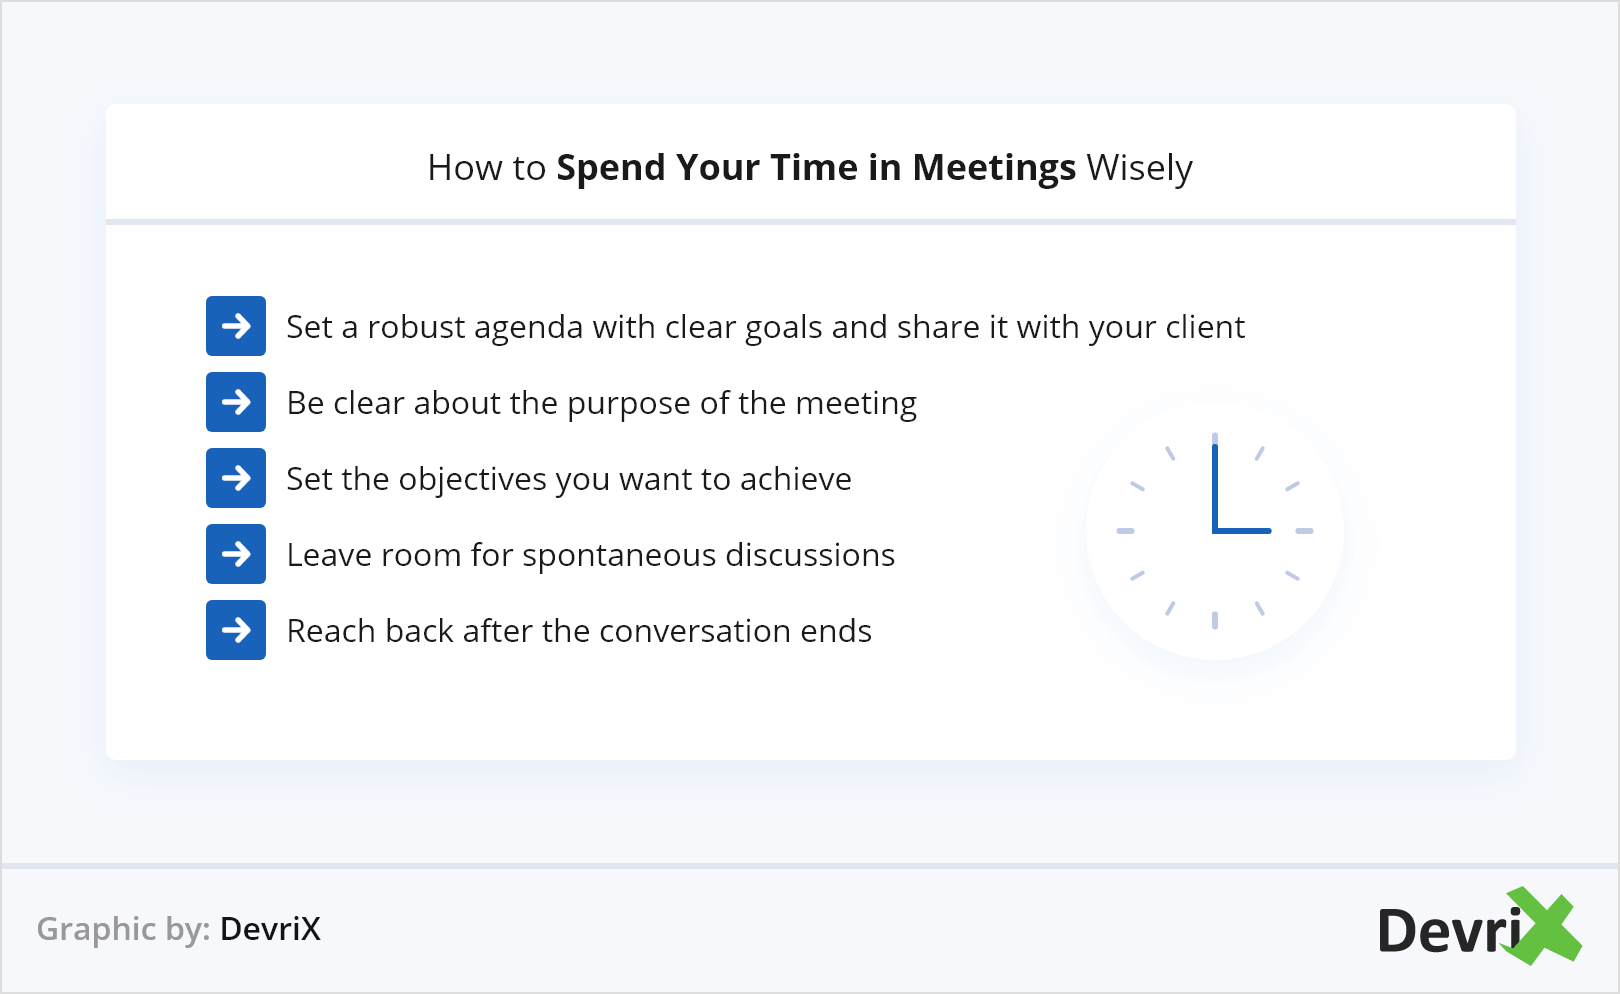 How to Spend Your Time in Meetings Wisely